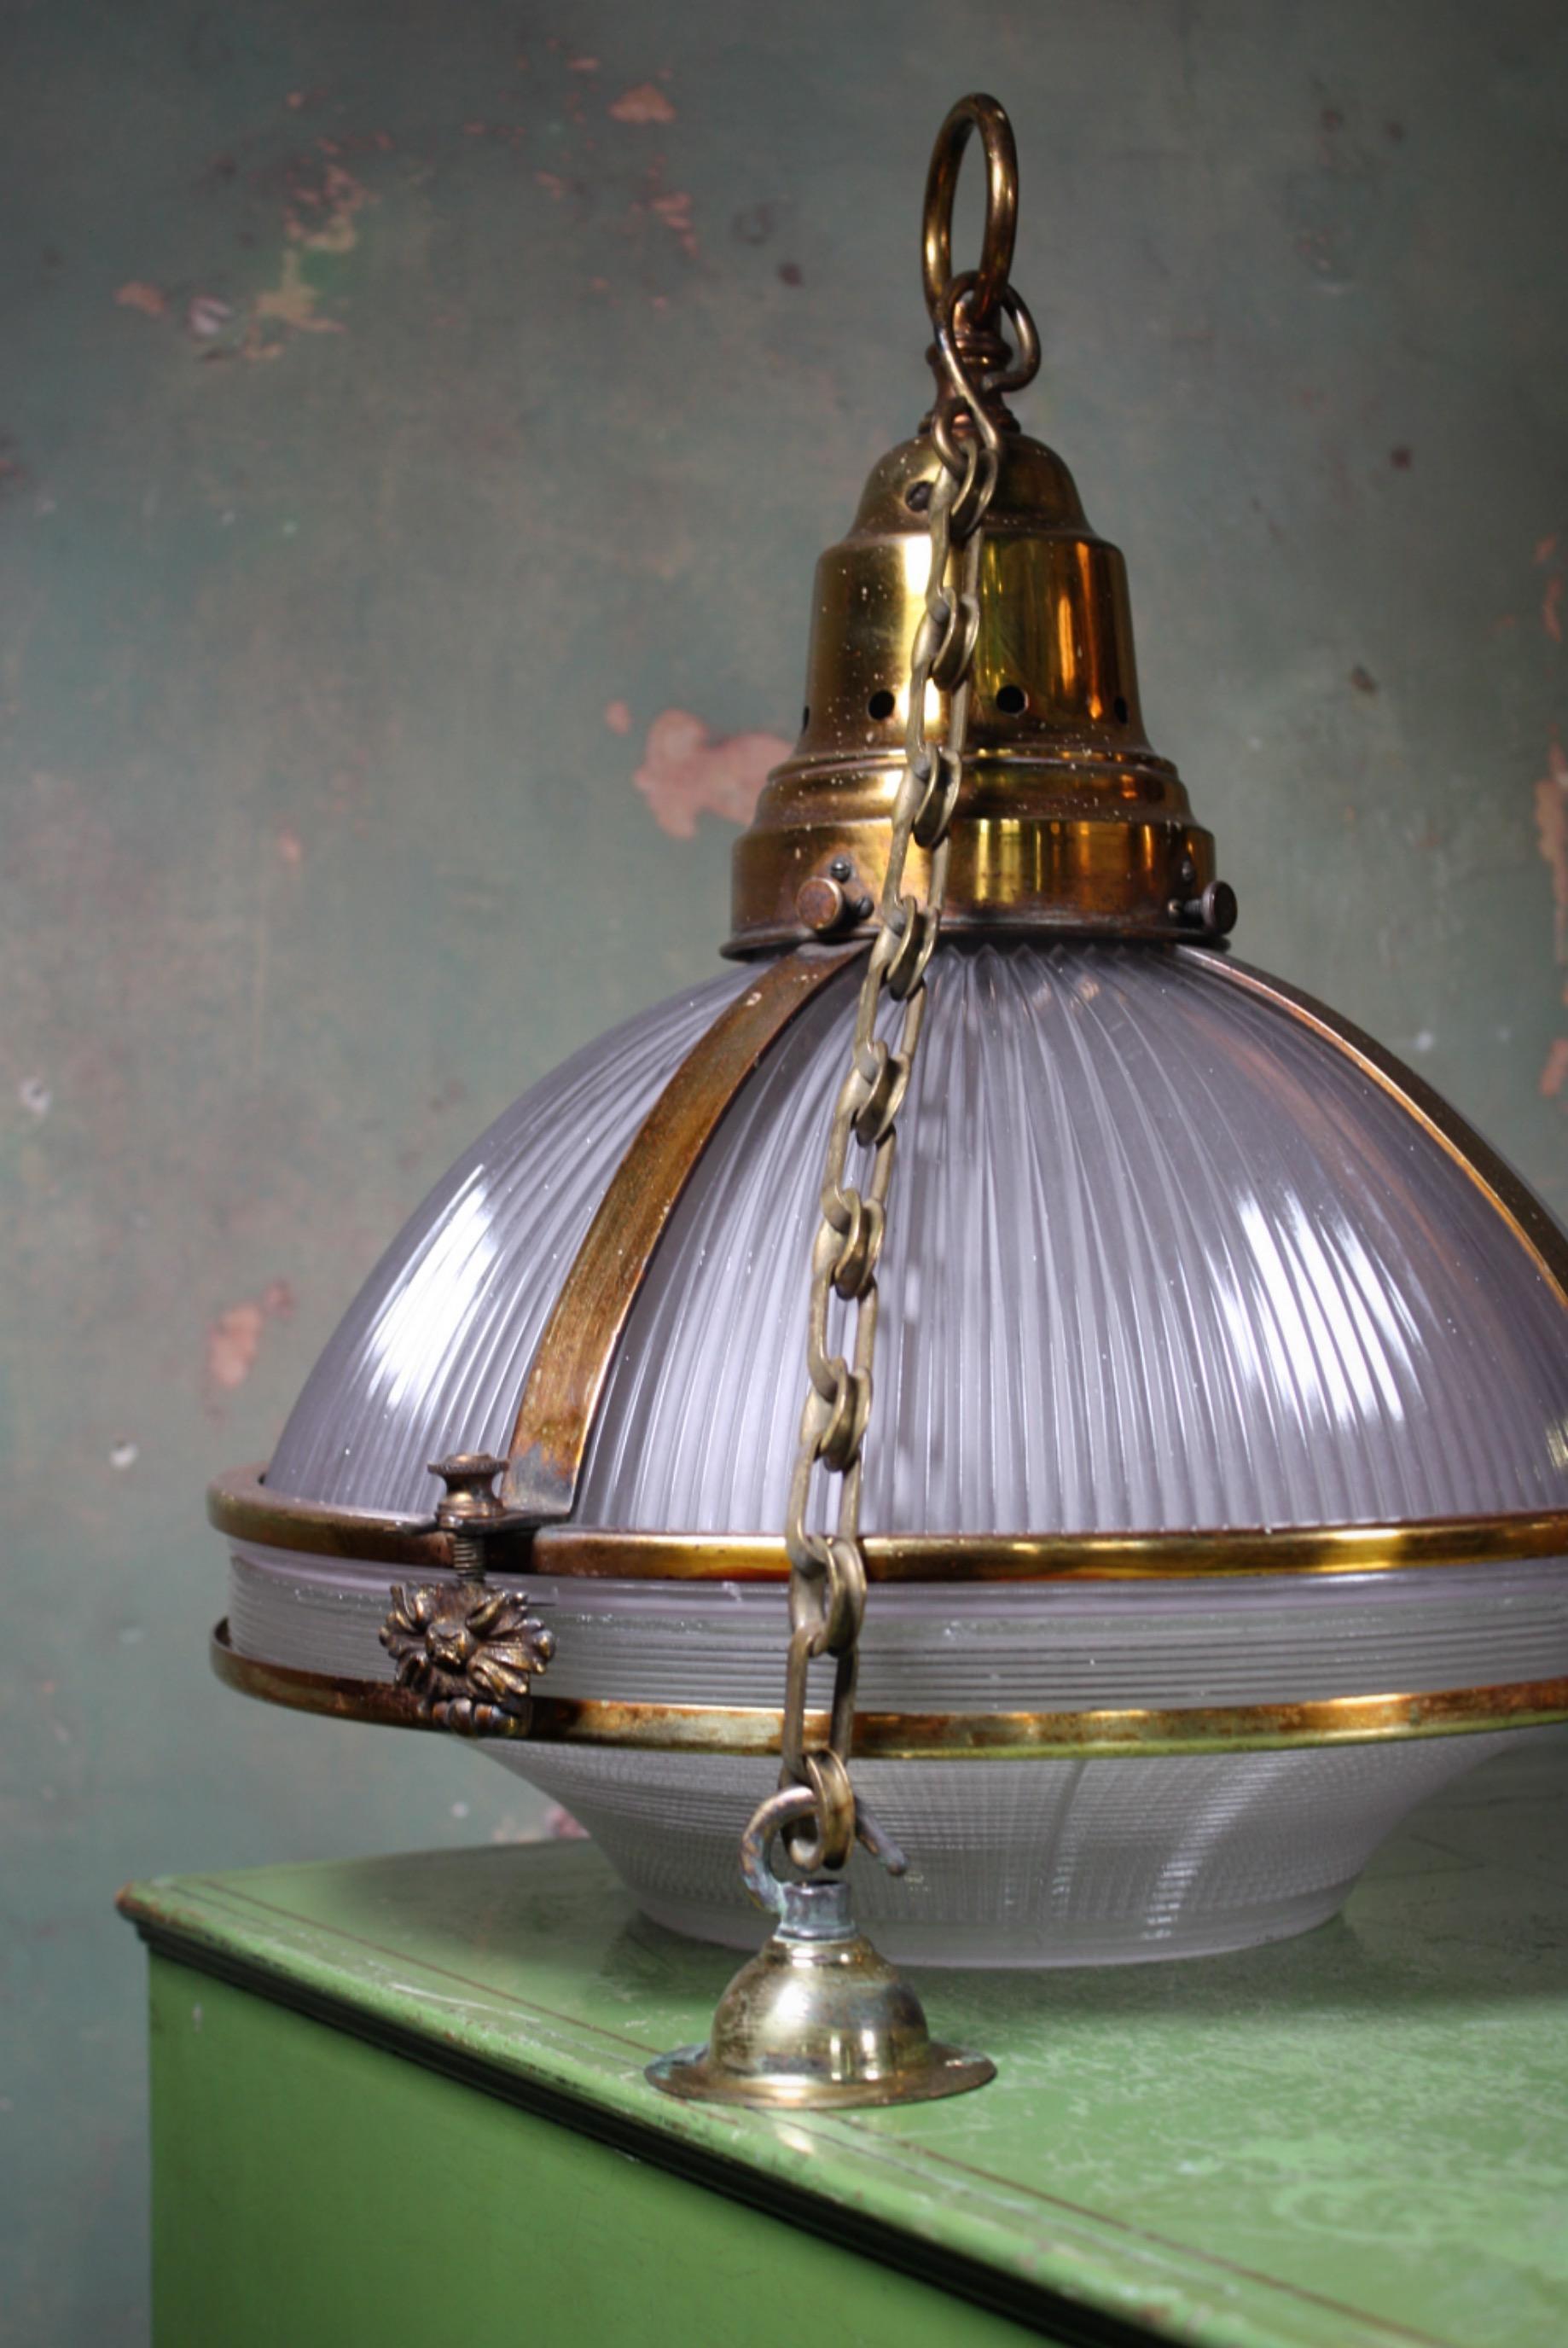 A very rare pair of violet tinted three part prismatic glass Holophane lanterns, housed within their original elaborate gilt copper cages, early 20th century.

The gilt copper (over brass) has a wonderful patina, with the finish over time almost